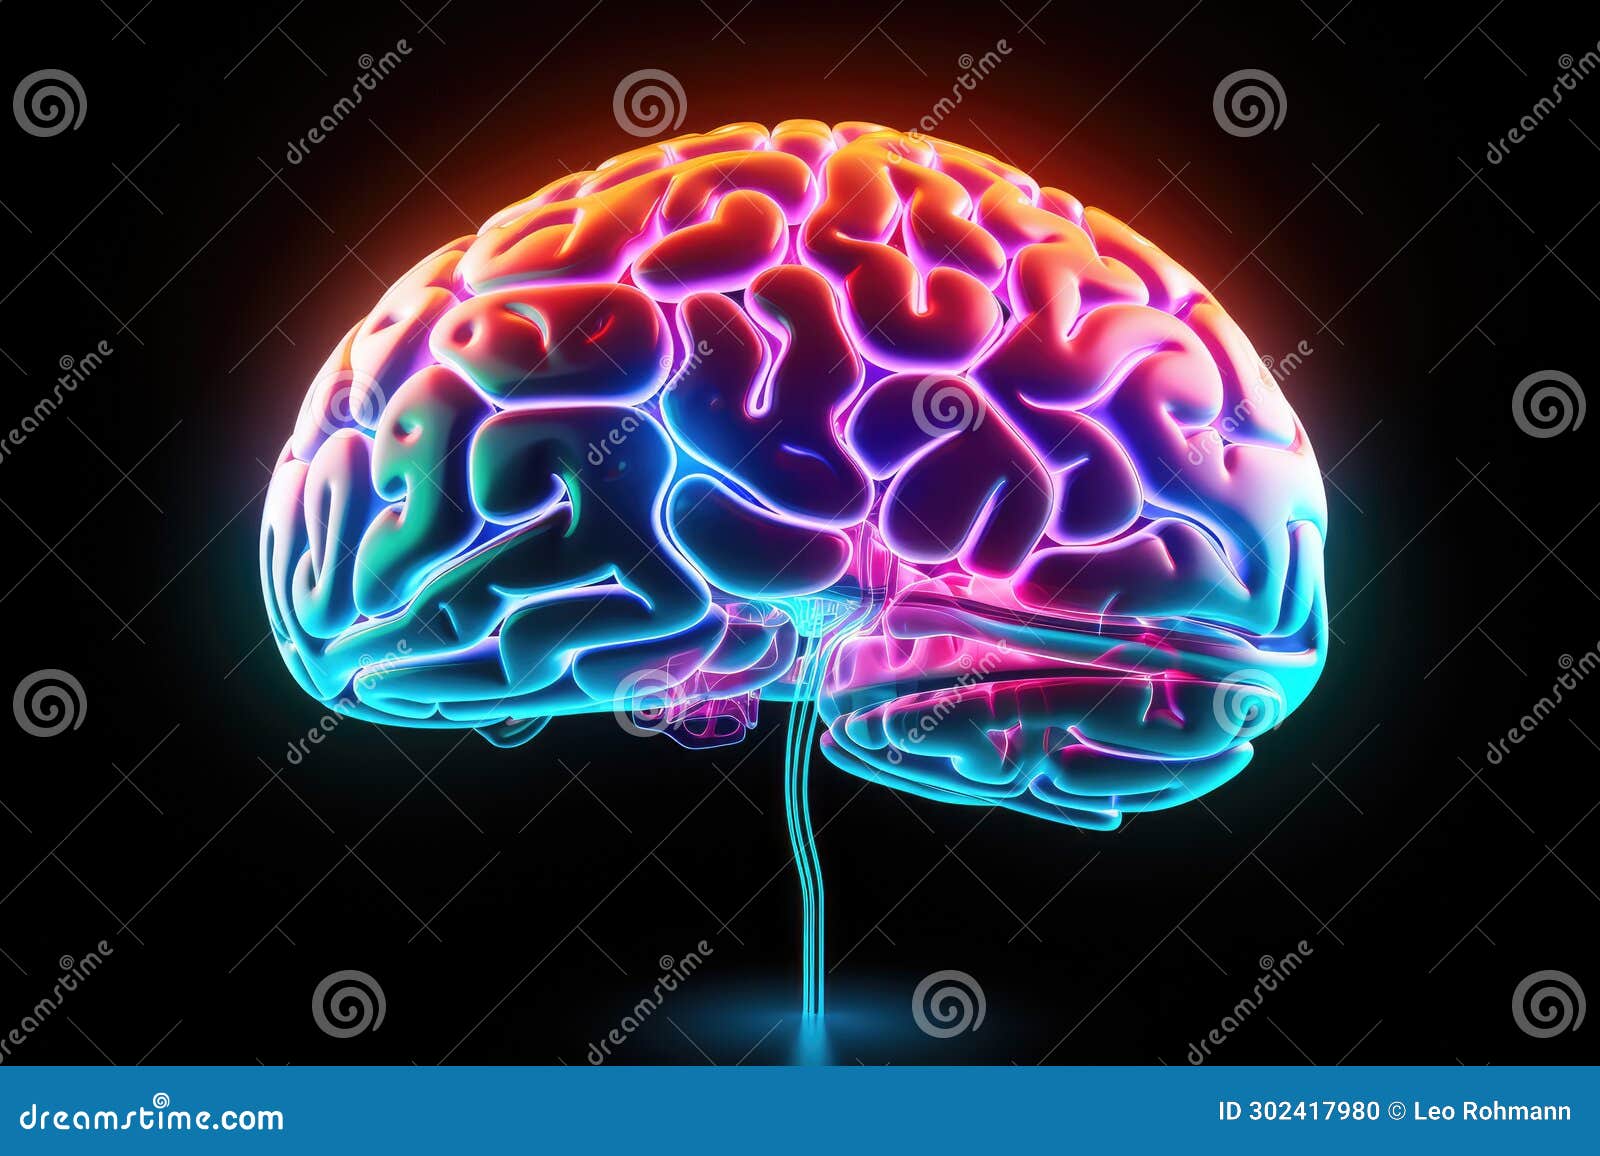 human brain neural plasticity, neuroscience and neurobiology. neurological diseases, mind disorders with neuroradiology oncology.